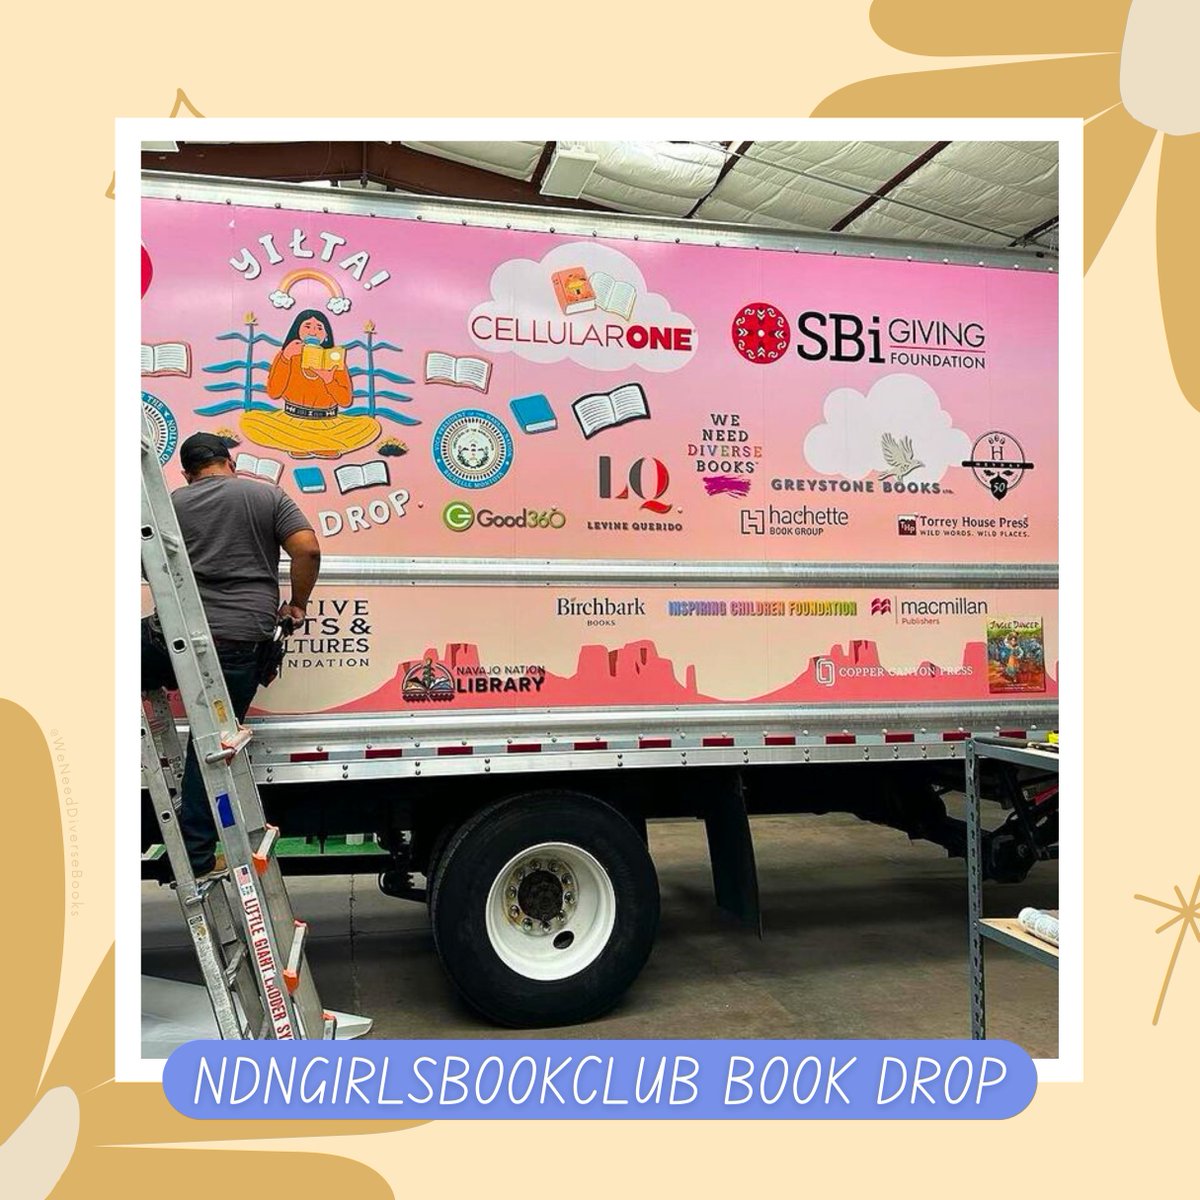 @WMG_NYC @ElloEllenOh One of our wonderful community partners, NDN Girls Book Club, launched their most recent book drop, delivering 10,000 free books by Indigenous authors to Native youth to the Navajo and Hopi communities!